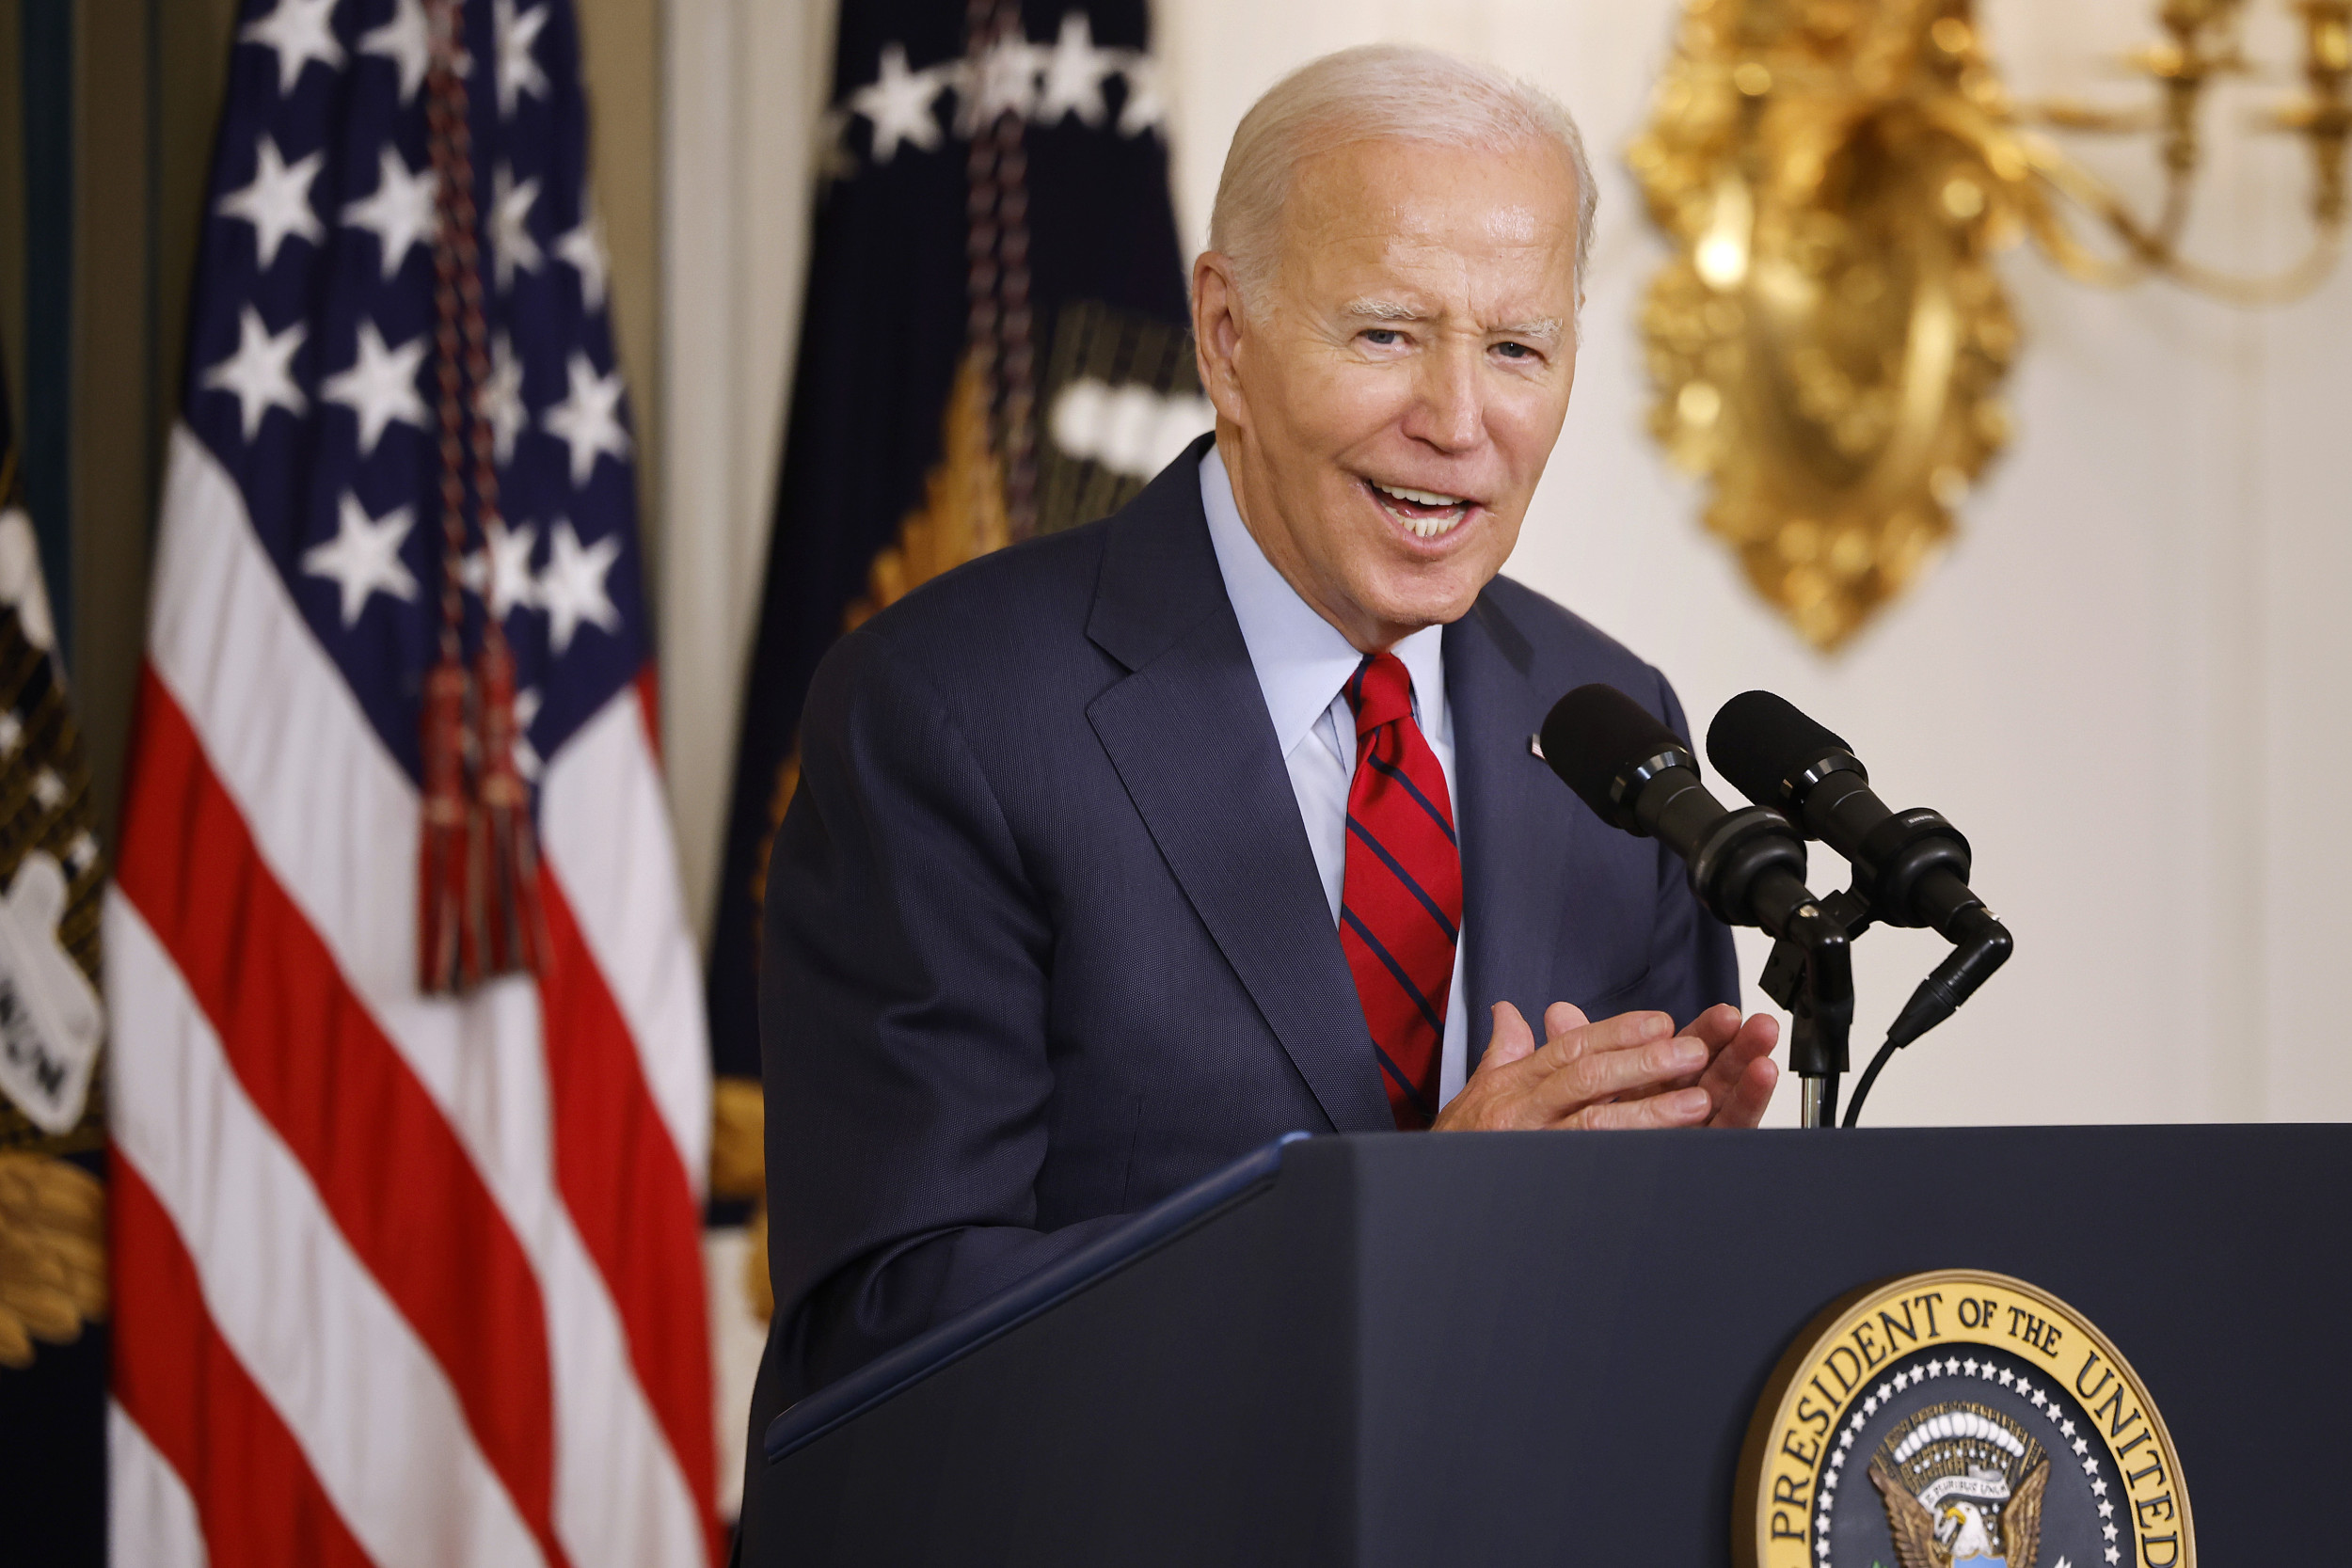 Map Shows Biden’s New 31 ‘Tech Hubs’ in US Ripe for Investment